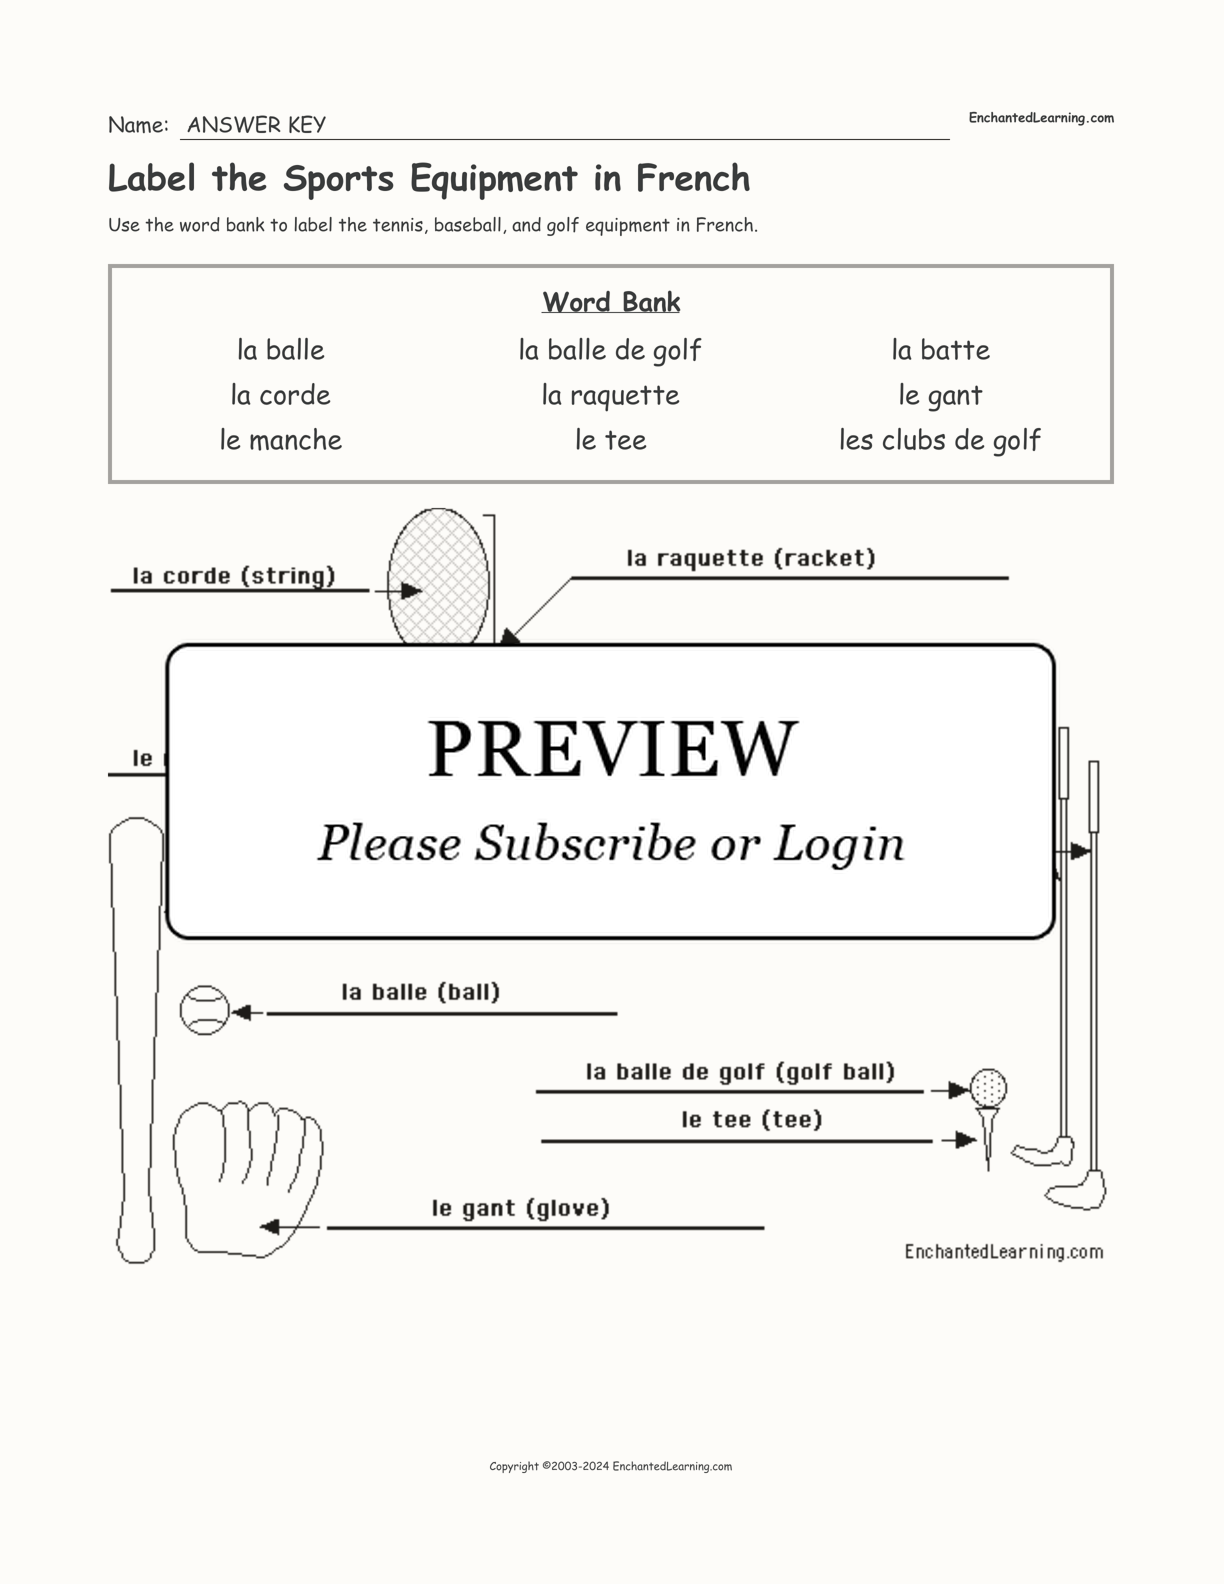 Label the Sports Equipment in French interactive worksheet page 2